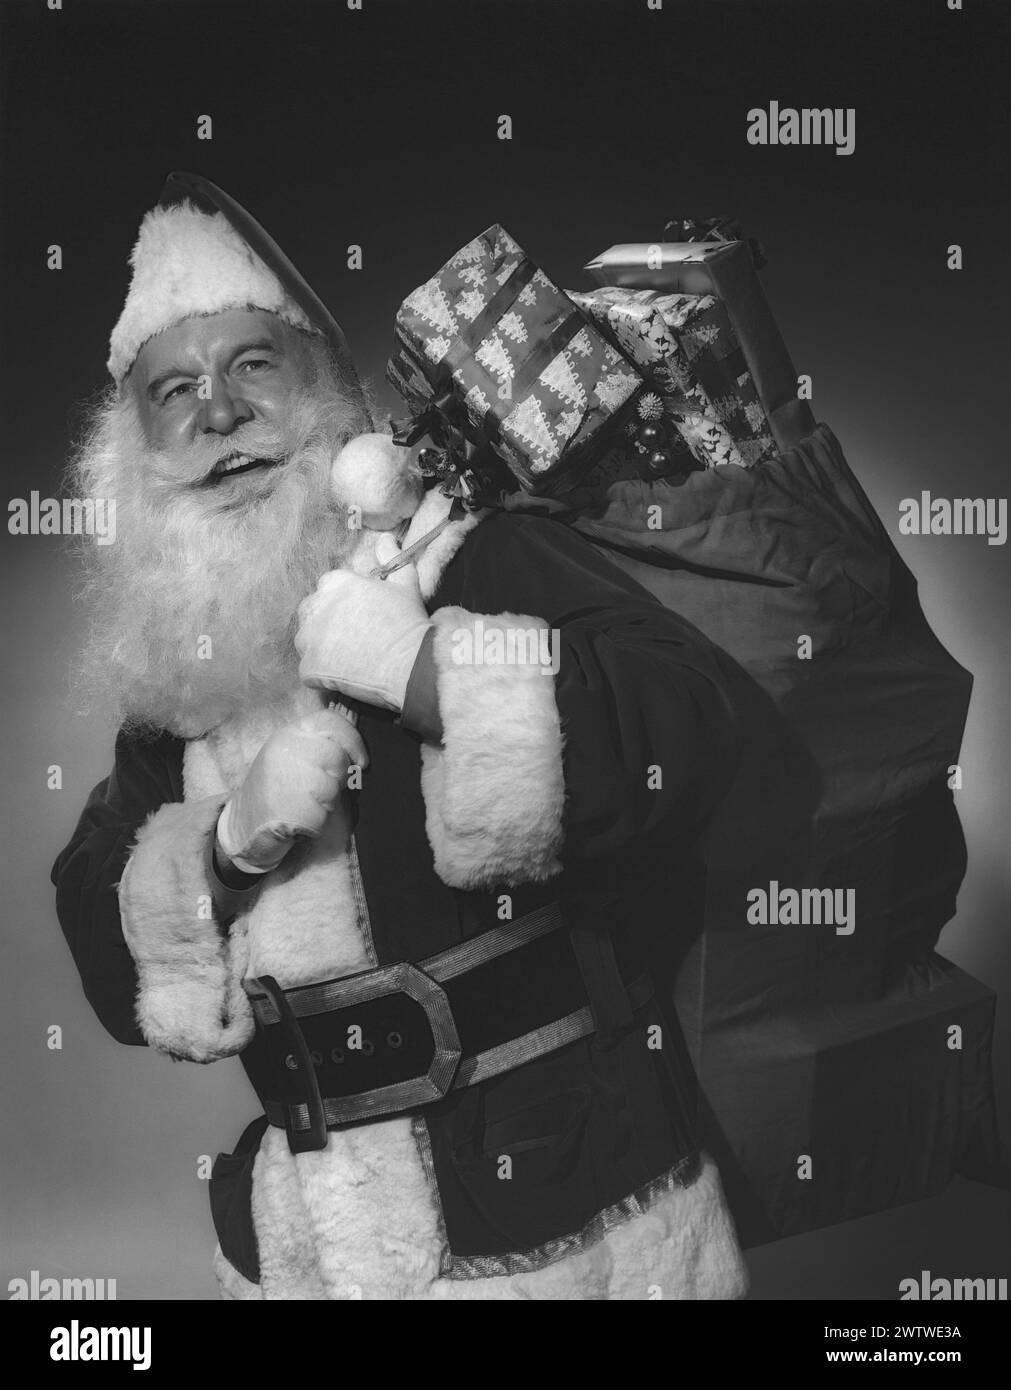 Santa Claus looking back and smiling with a sack of gifts thrown over his shoulder Stock Photo